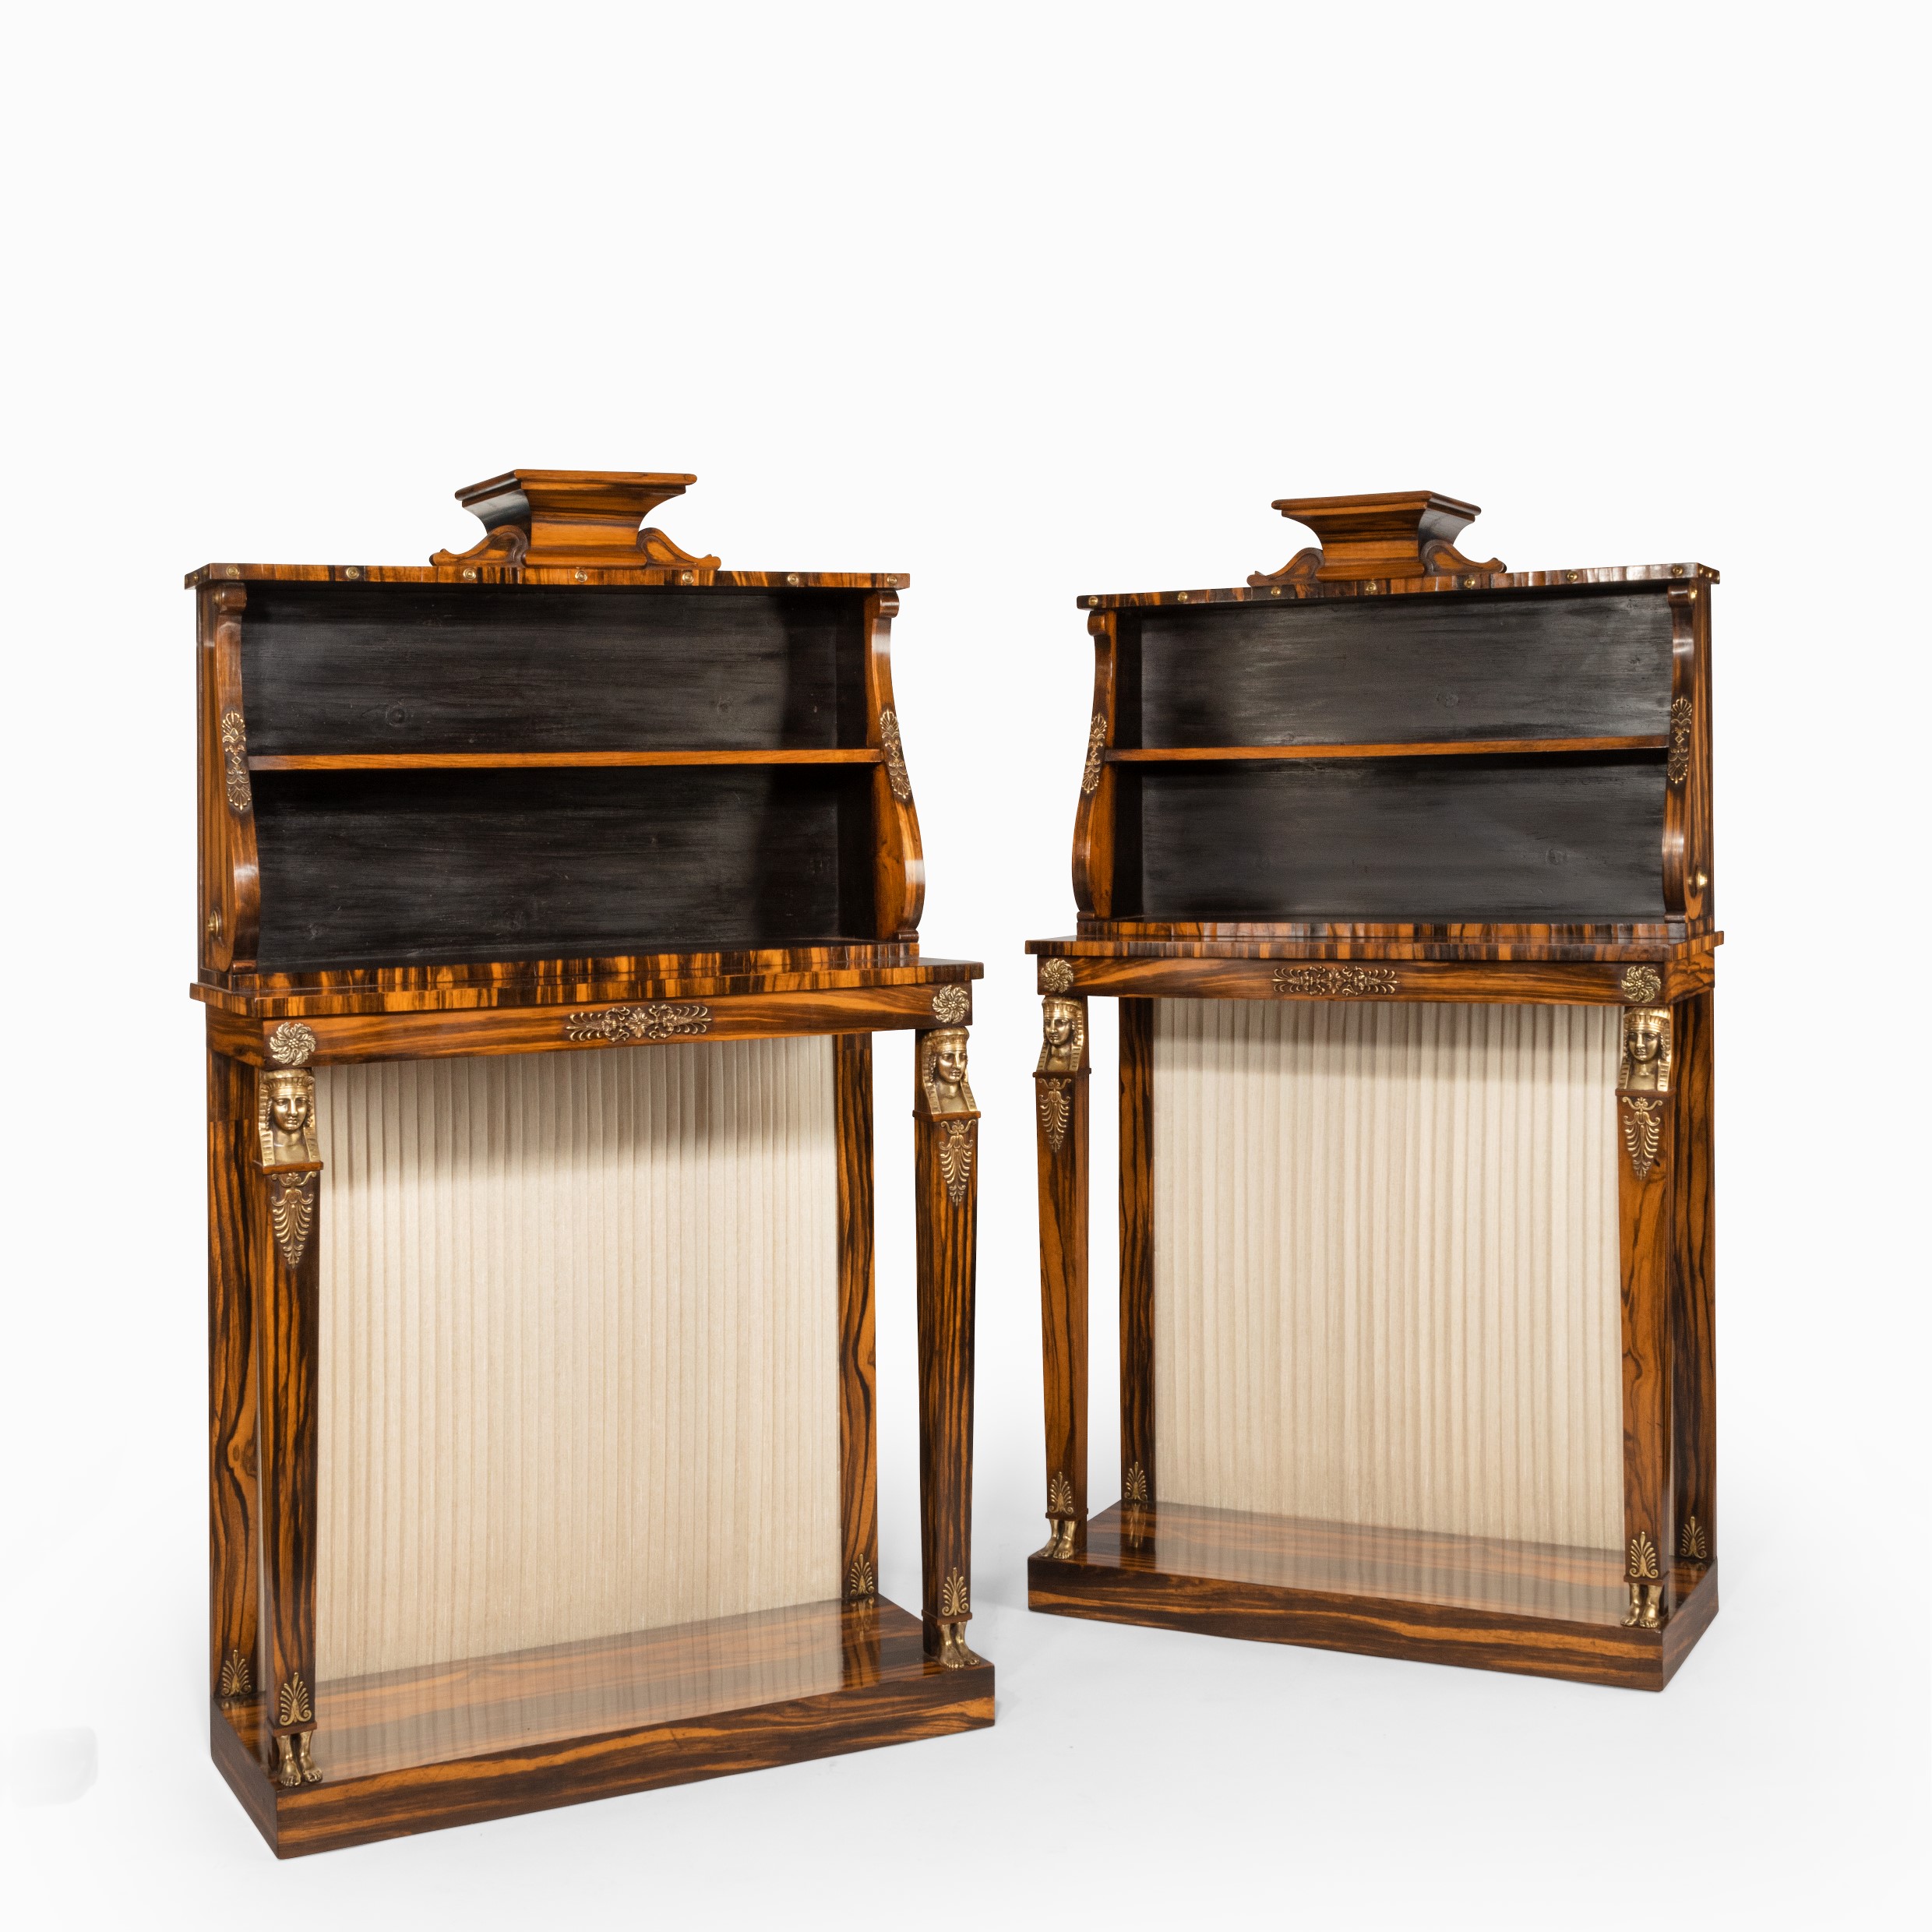 Regency coromandel and ormolu bookcase console tables in the style of Thomas Hope